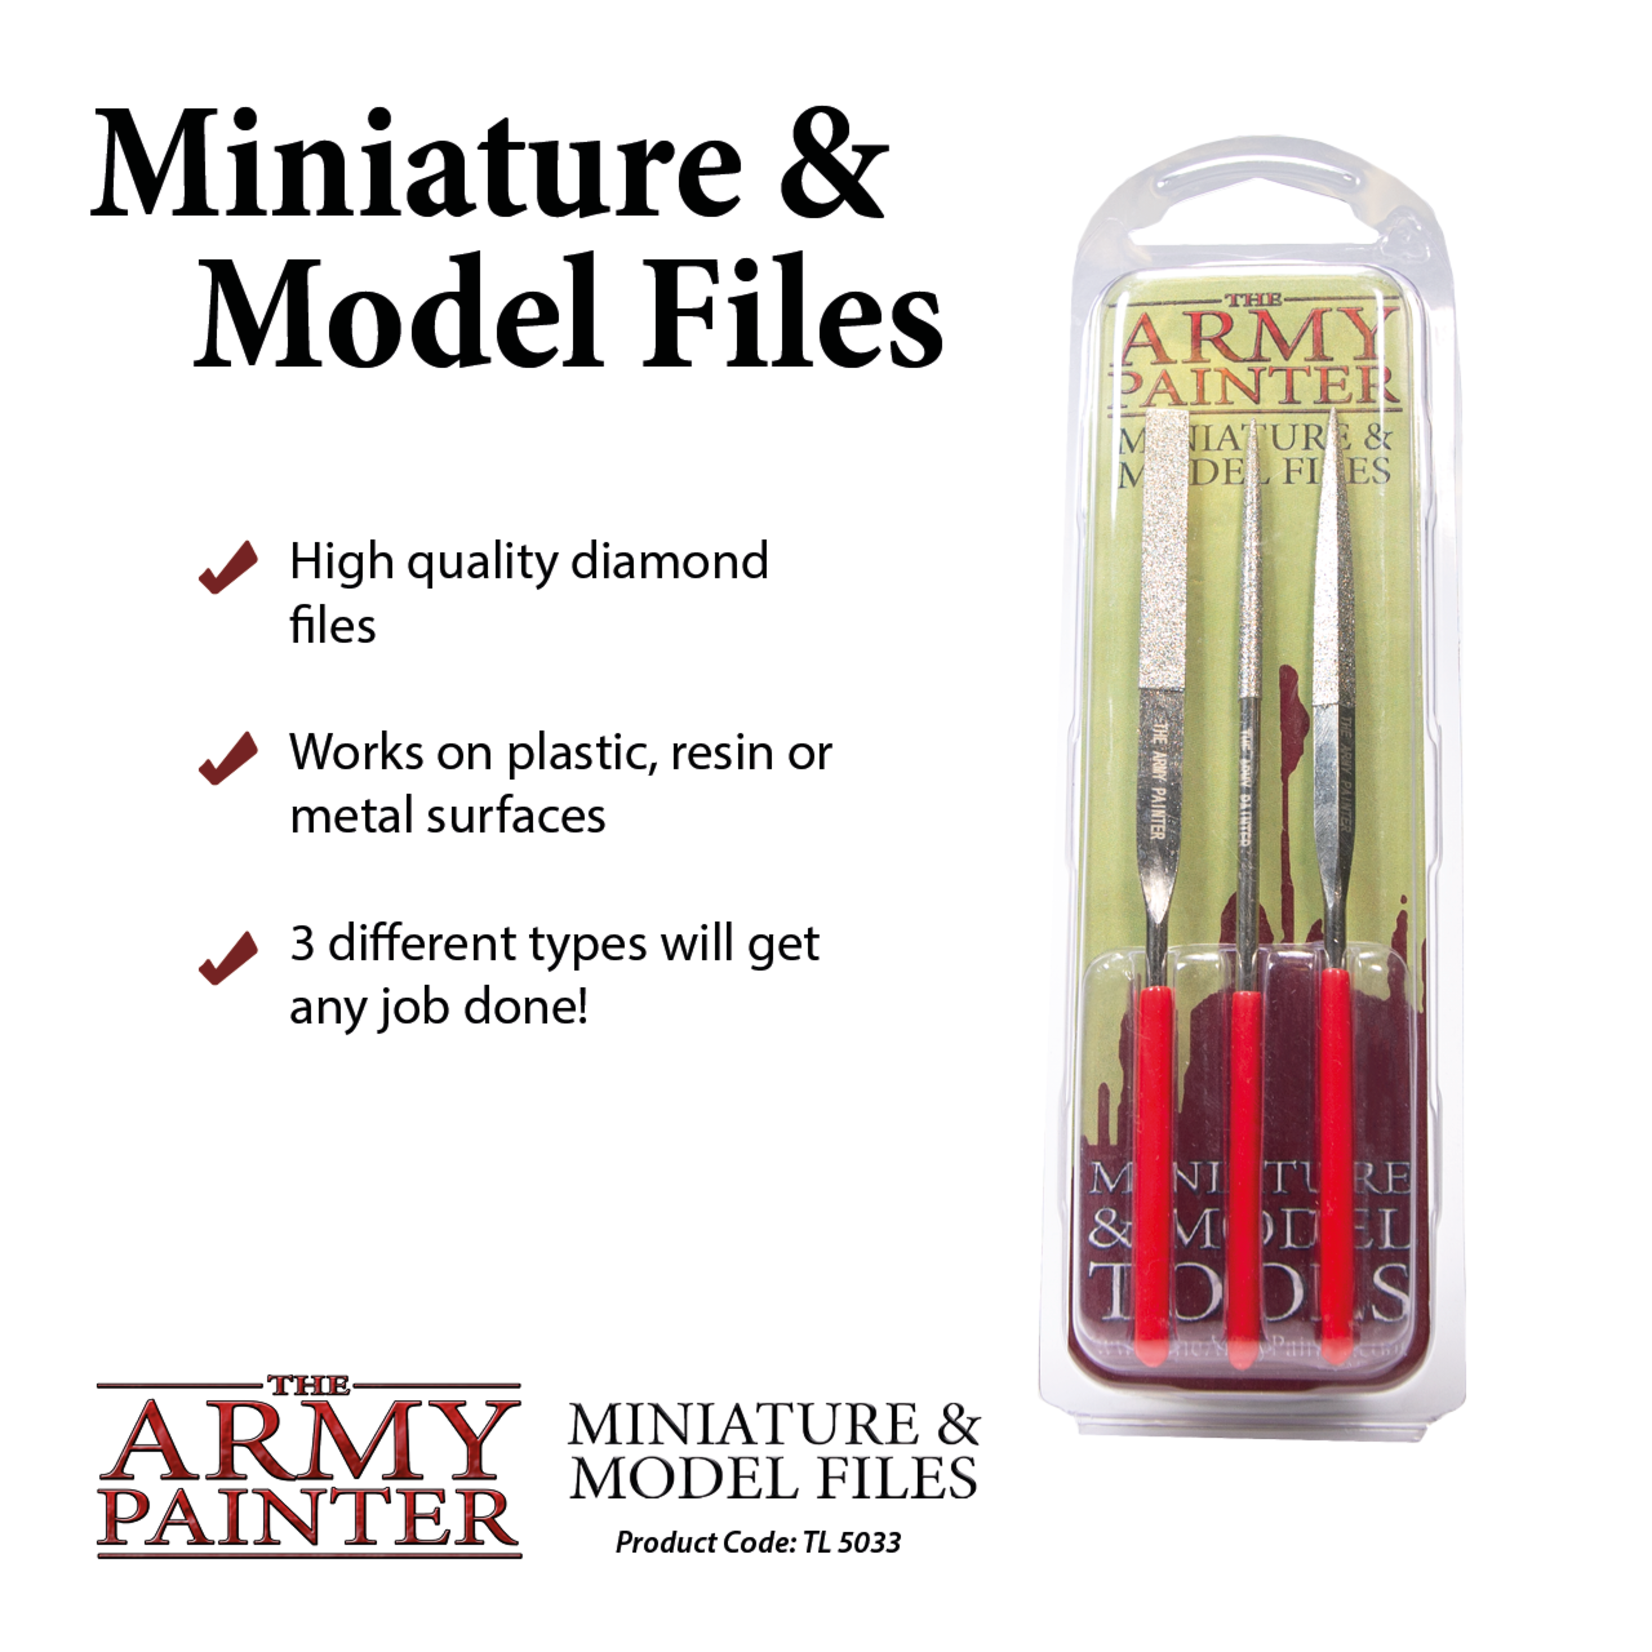 The Army Painter Miniature & Model Files